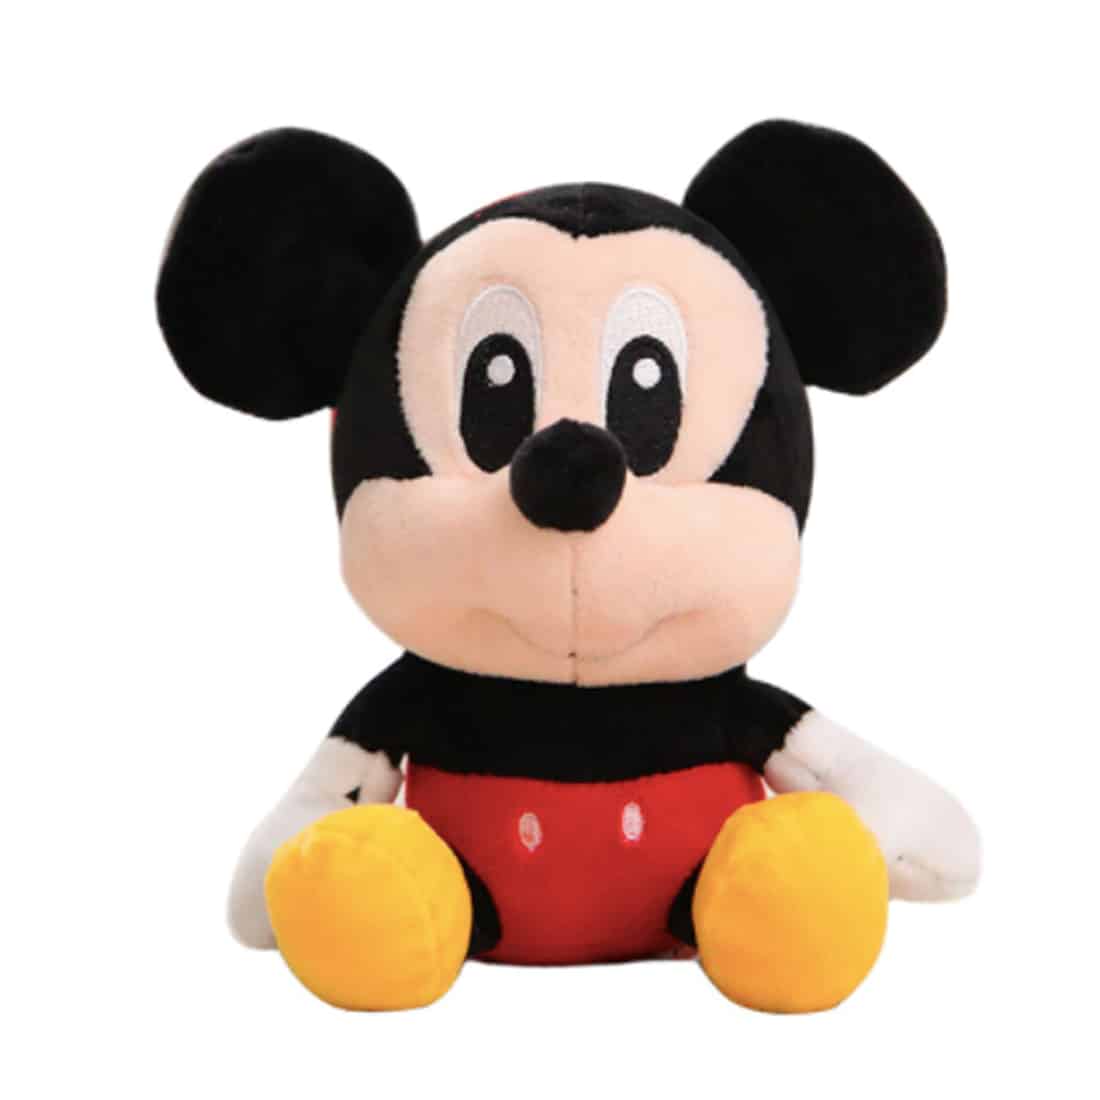 Baby Mickey Mouse plush